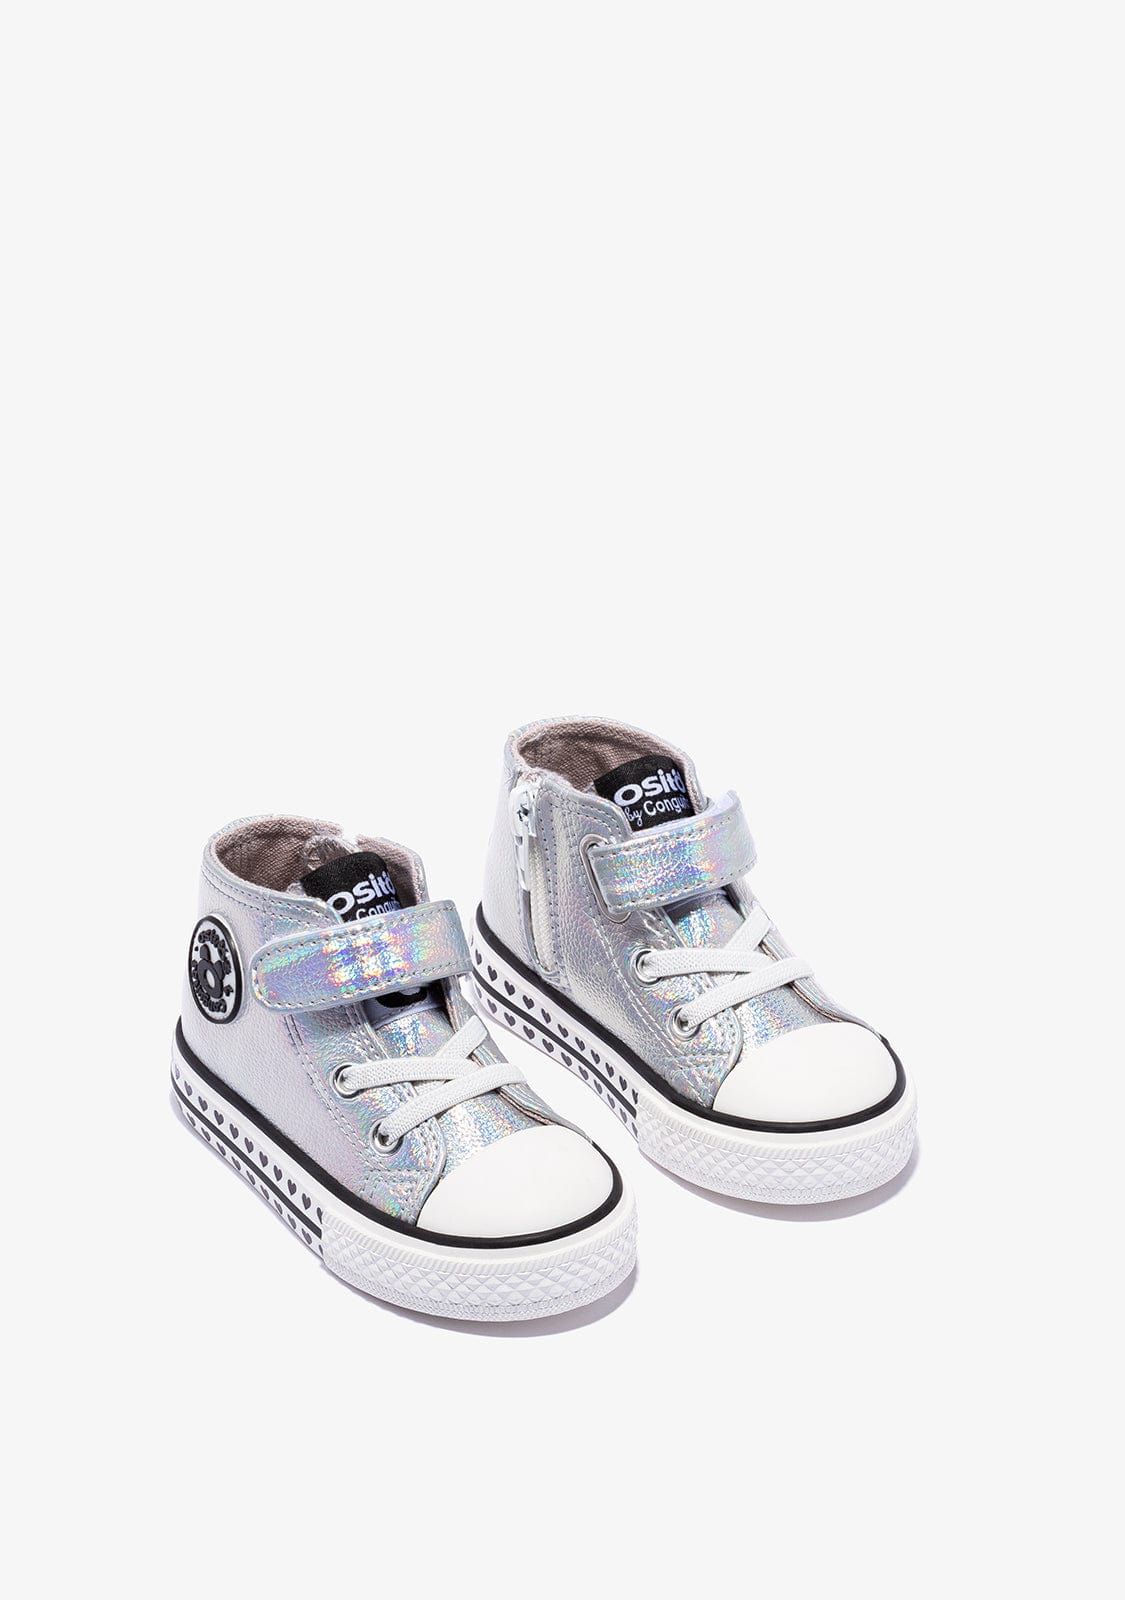 OSITO Shoes Baby's Iridescent Silver Hi-Top Sneakers